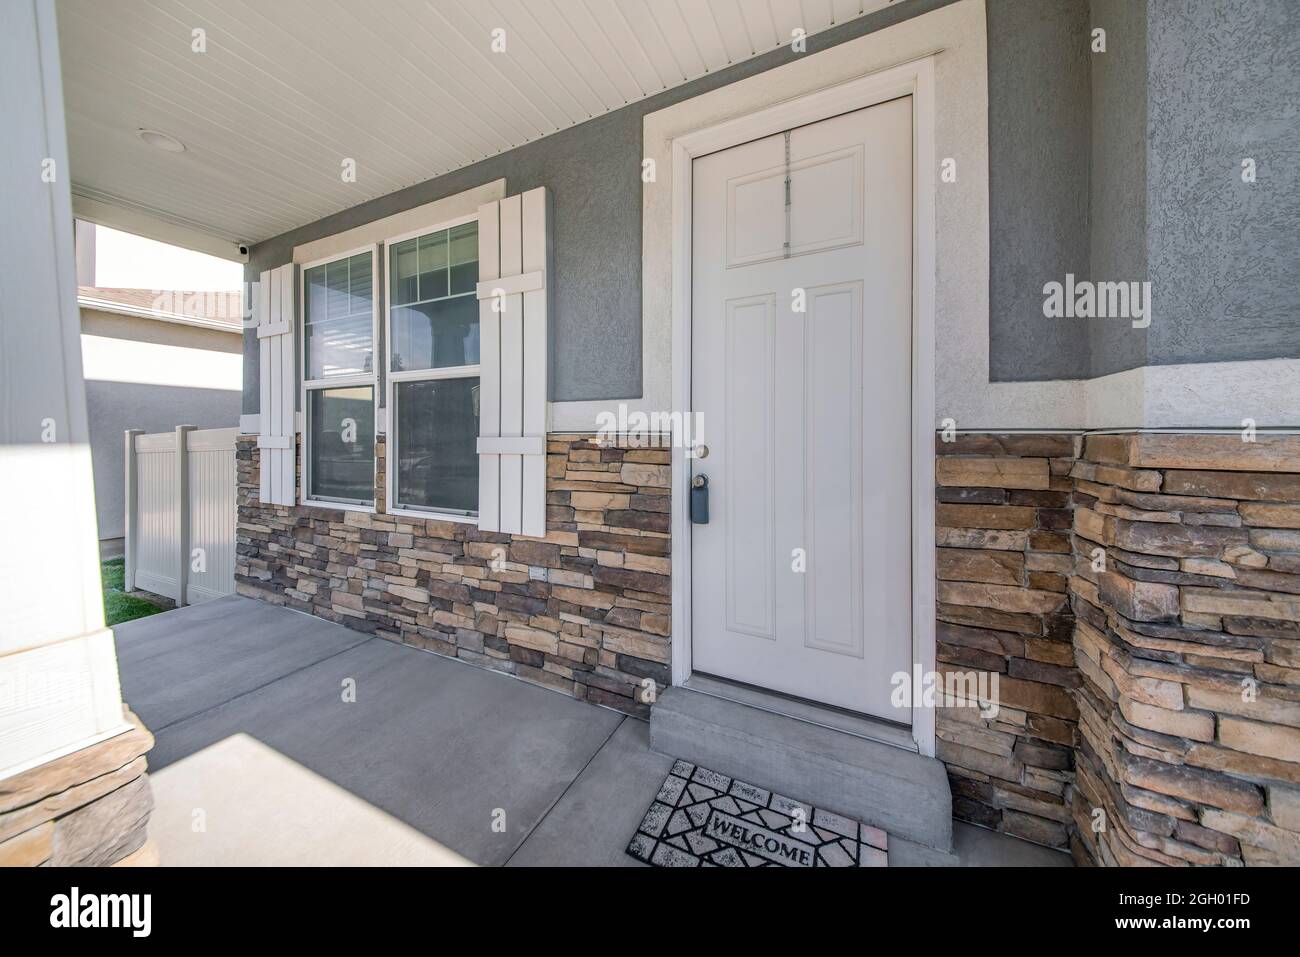 Exterior of a house with gray and stone veneer siding Stock Photo